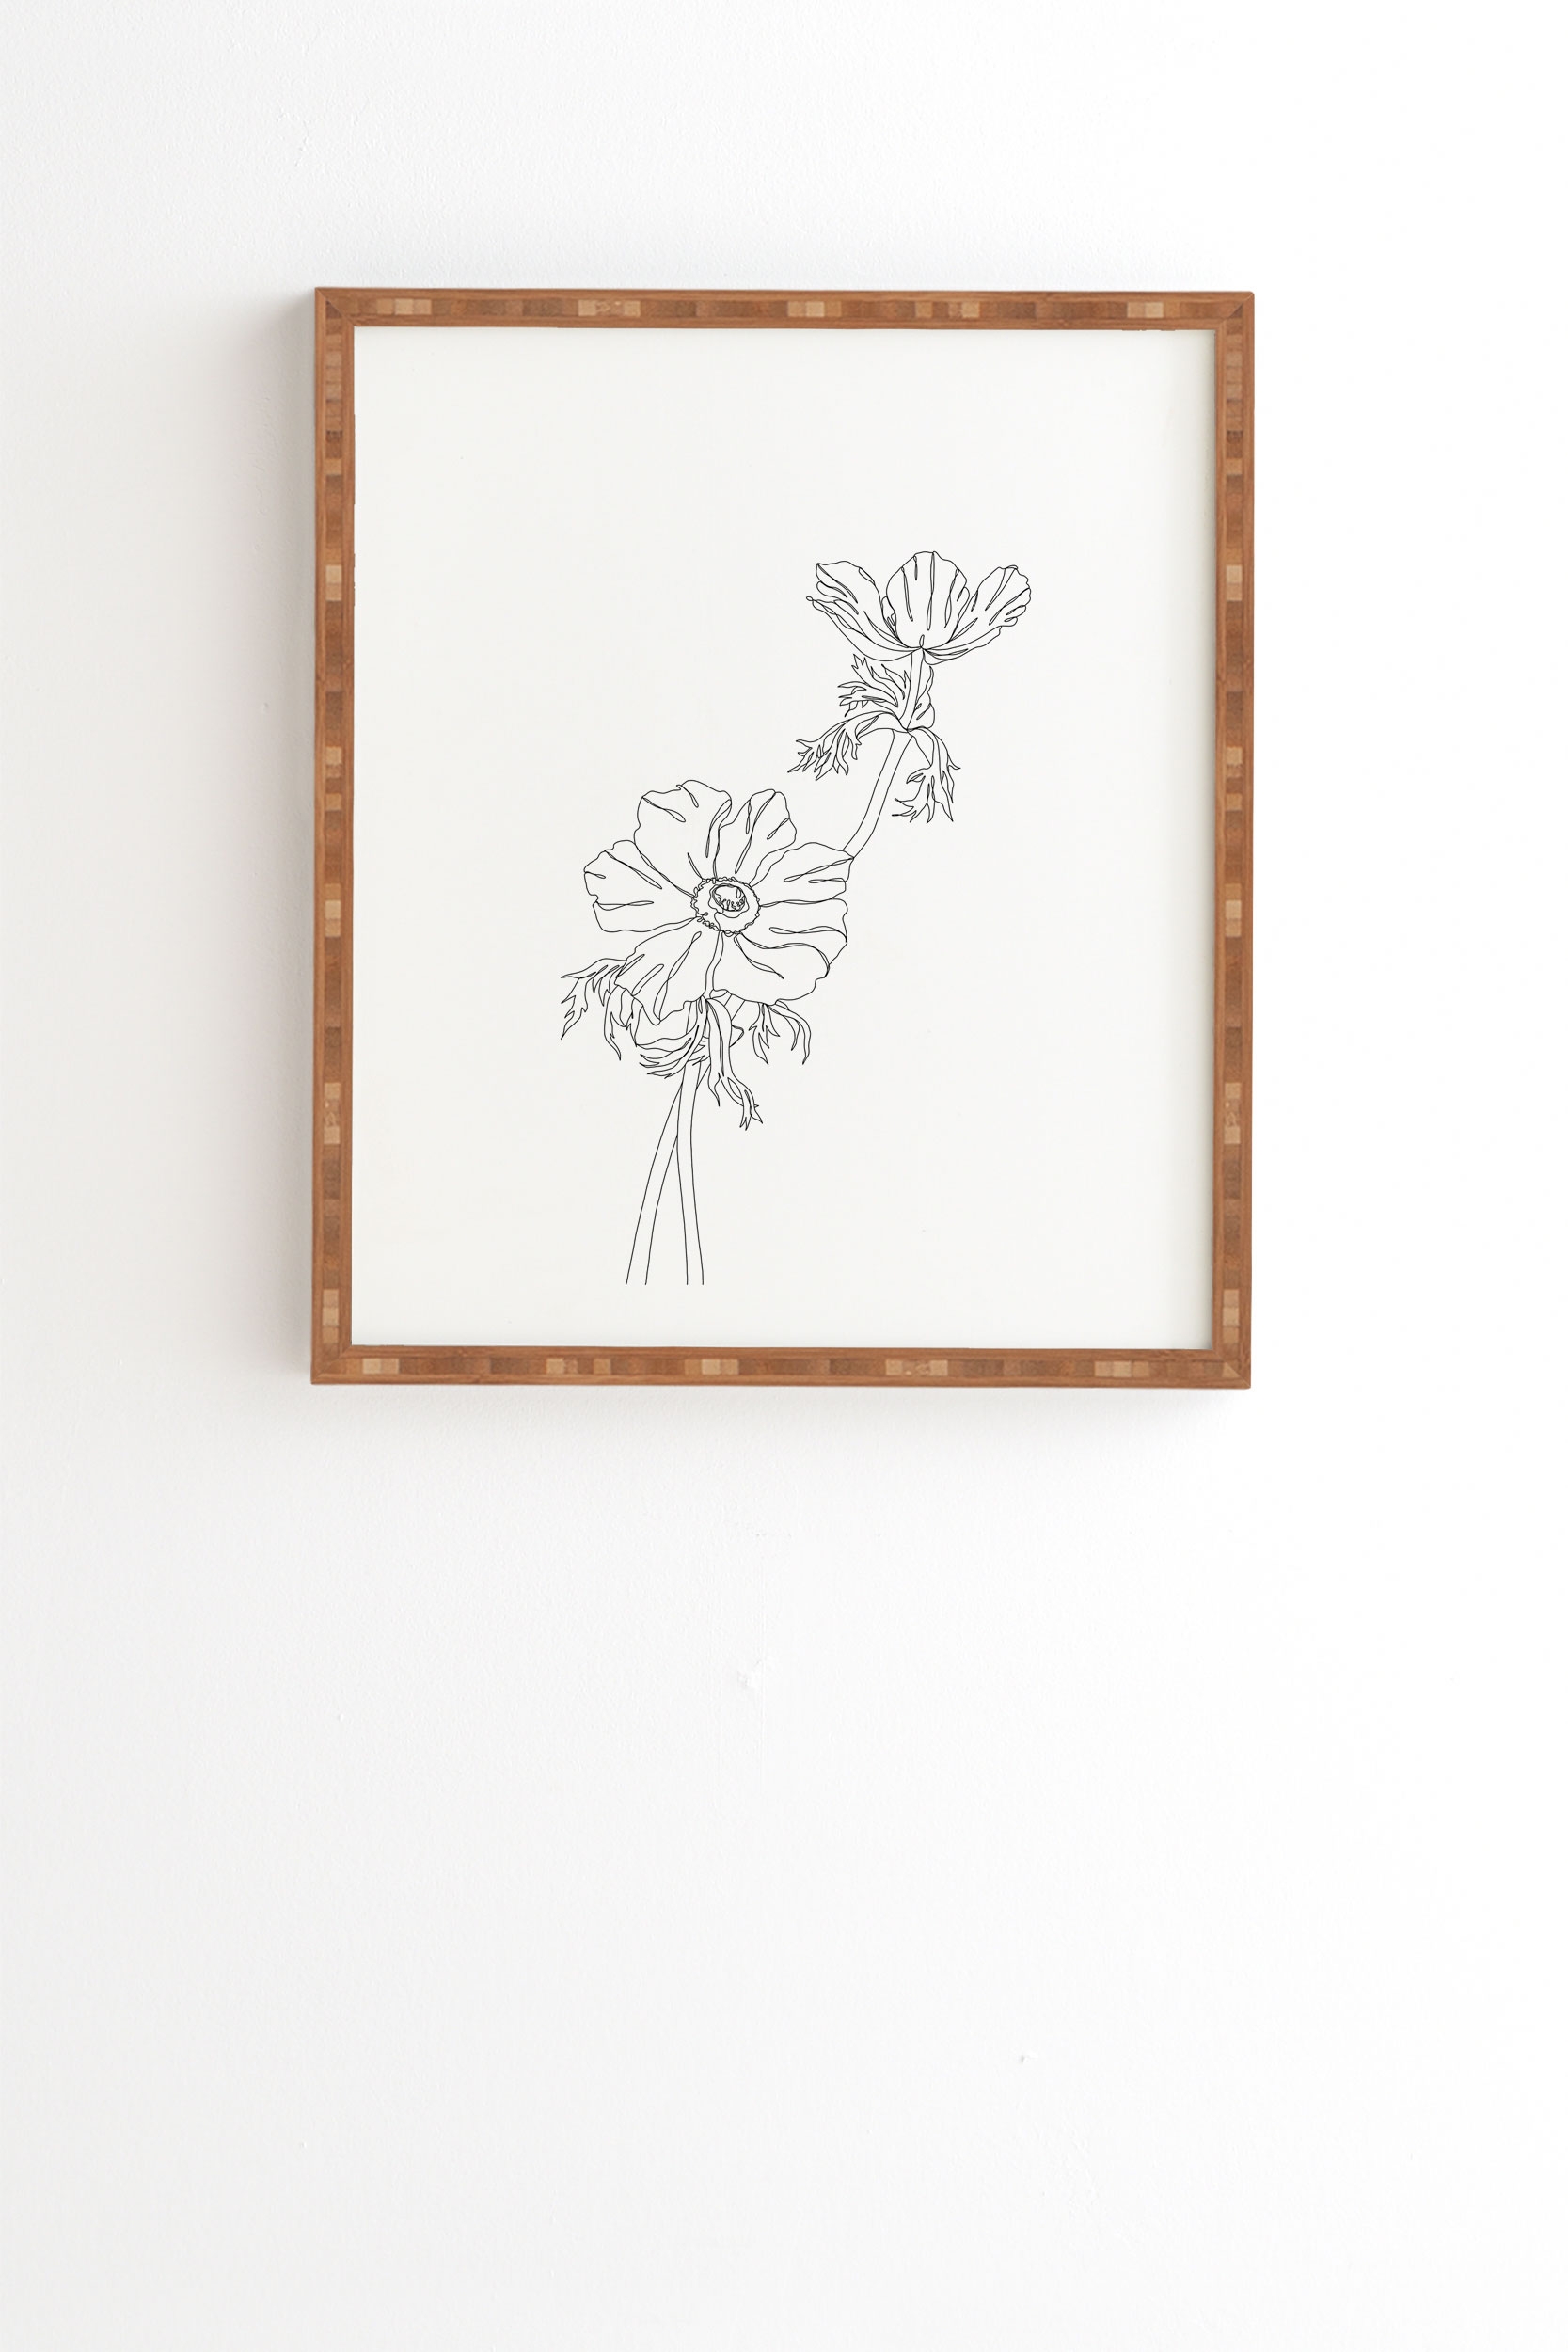 Botanical Illustration Joan by The Colour Study - Framed Wall Art Bamboo 8" x 9.5" - Image 0